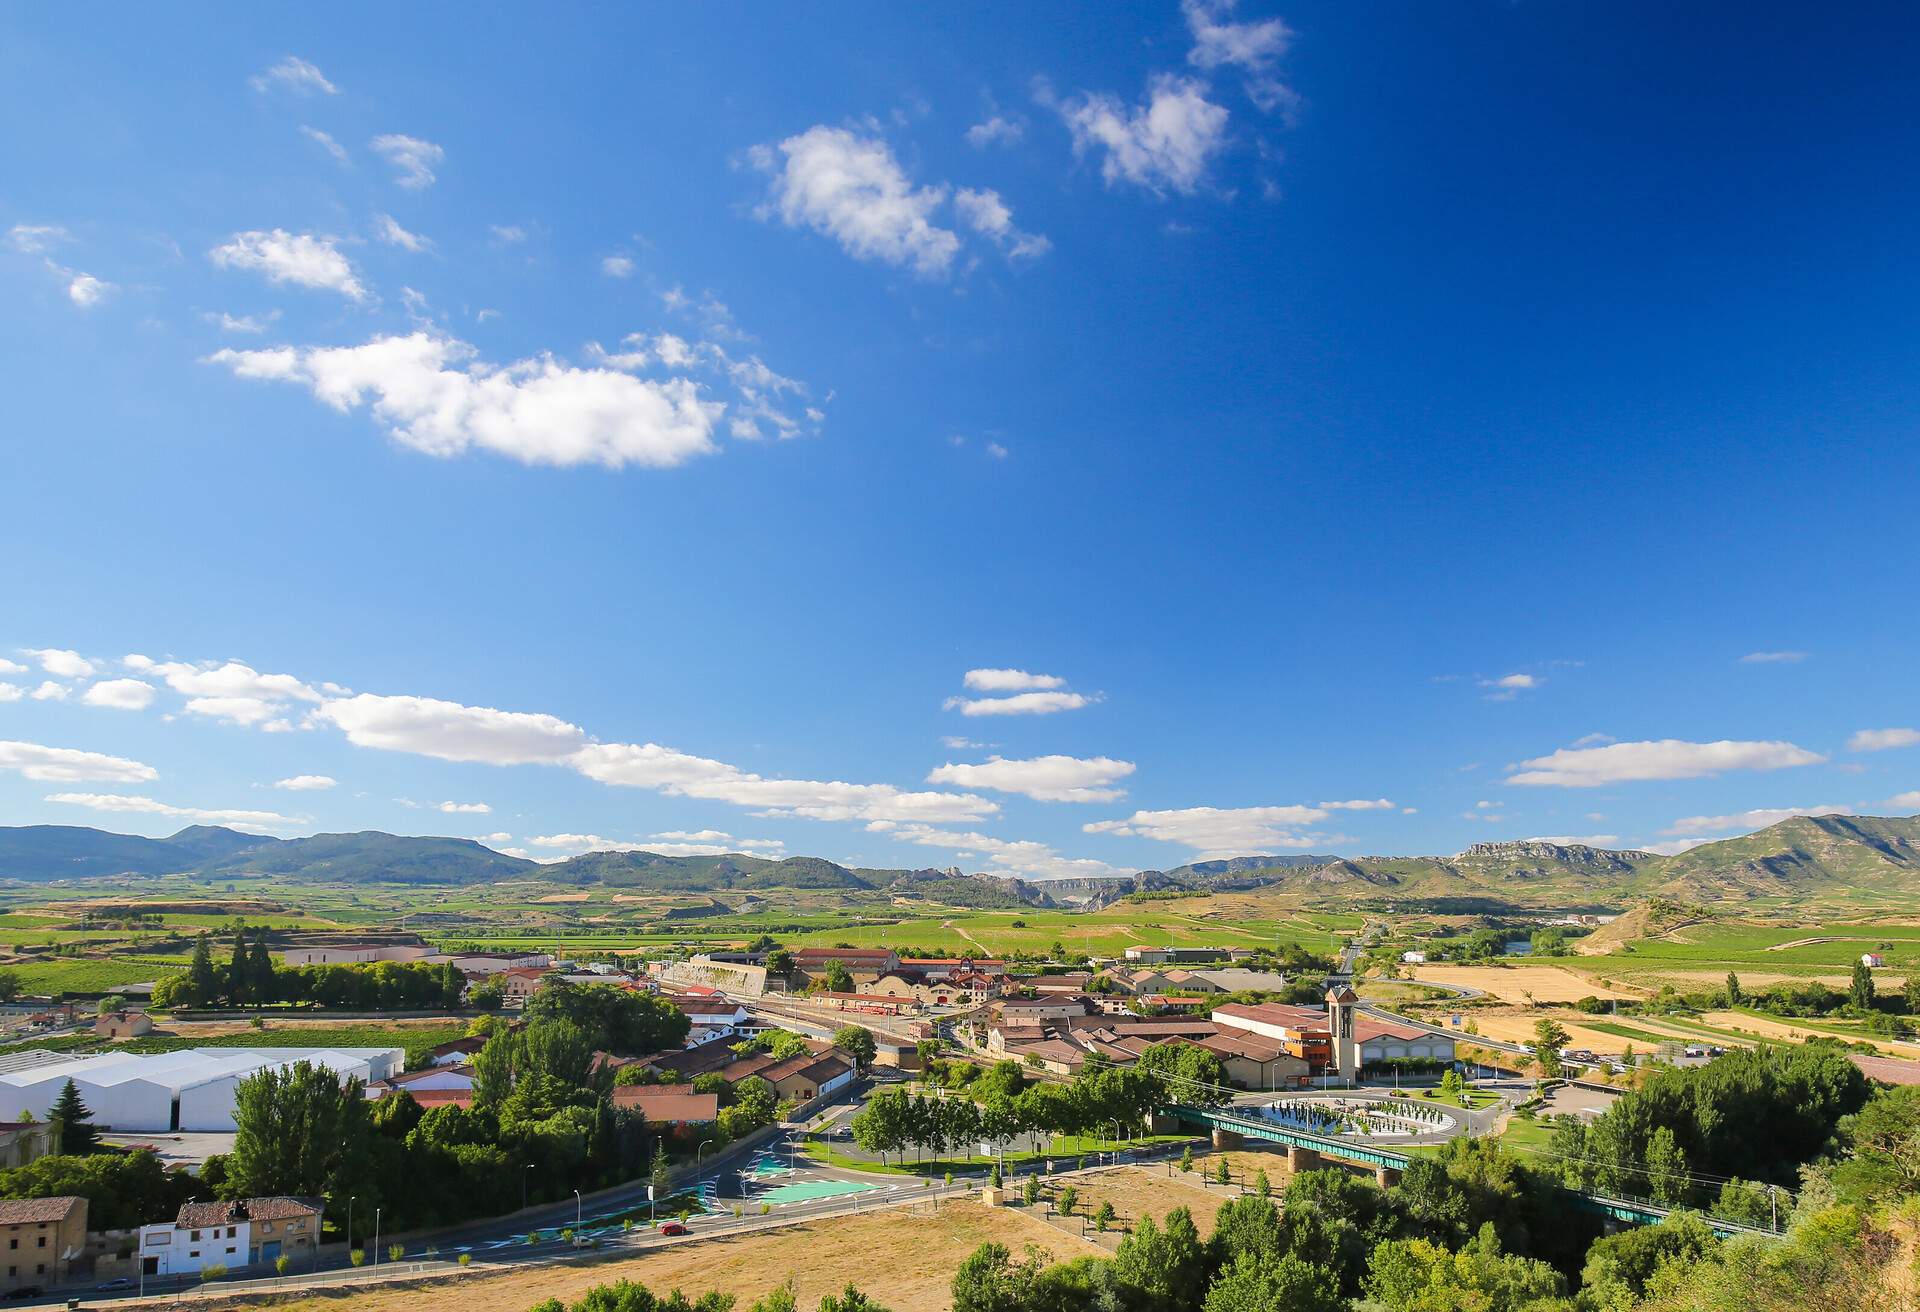 View on the famous bodegas or wine houses and vineyards of the Rioja Alta wine region near Haro, La Rioja, Spain